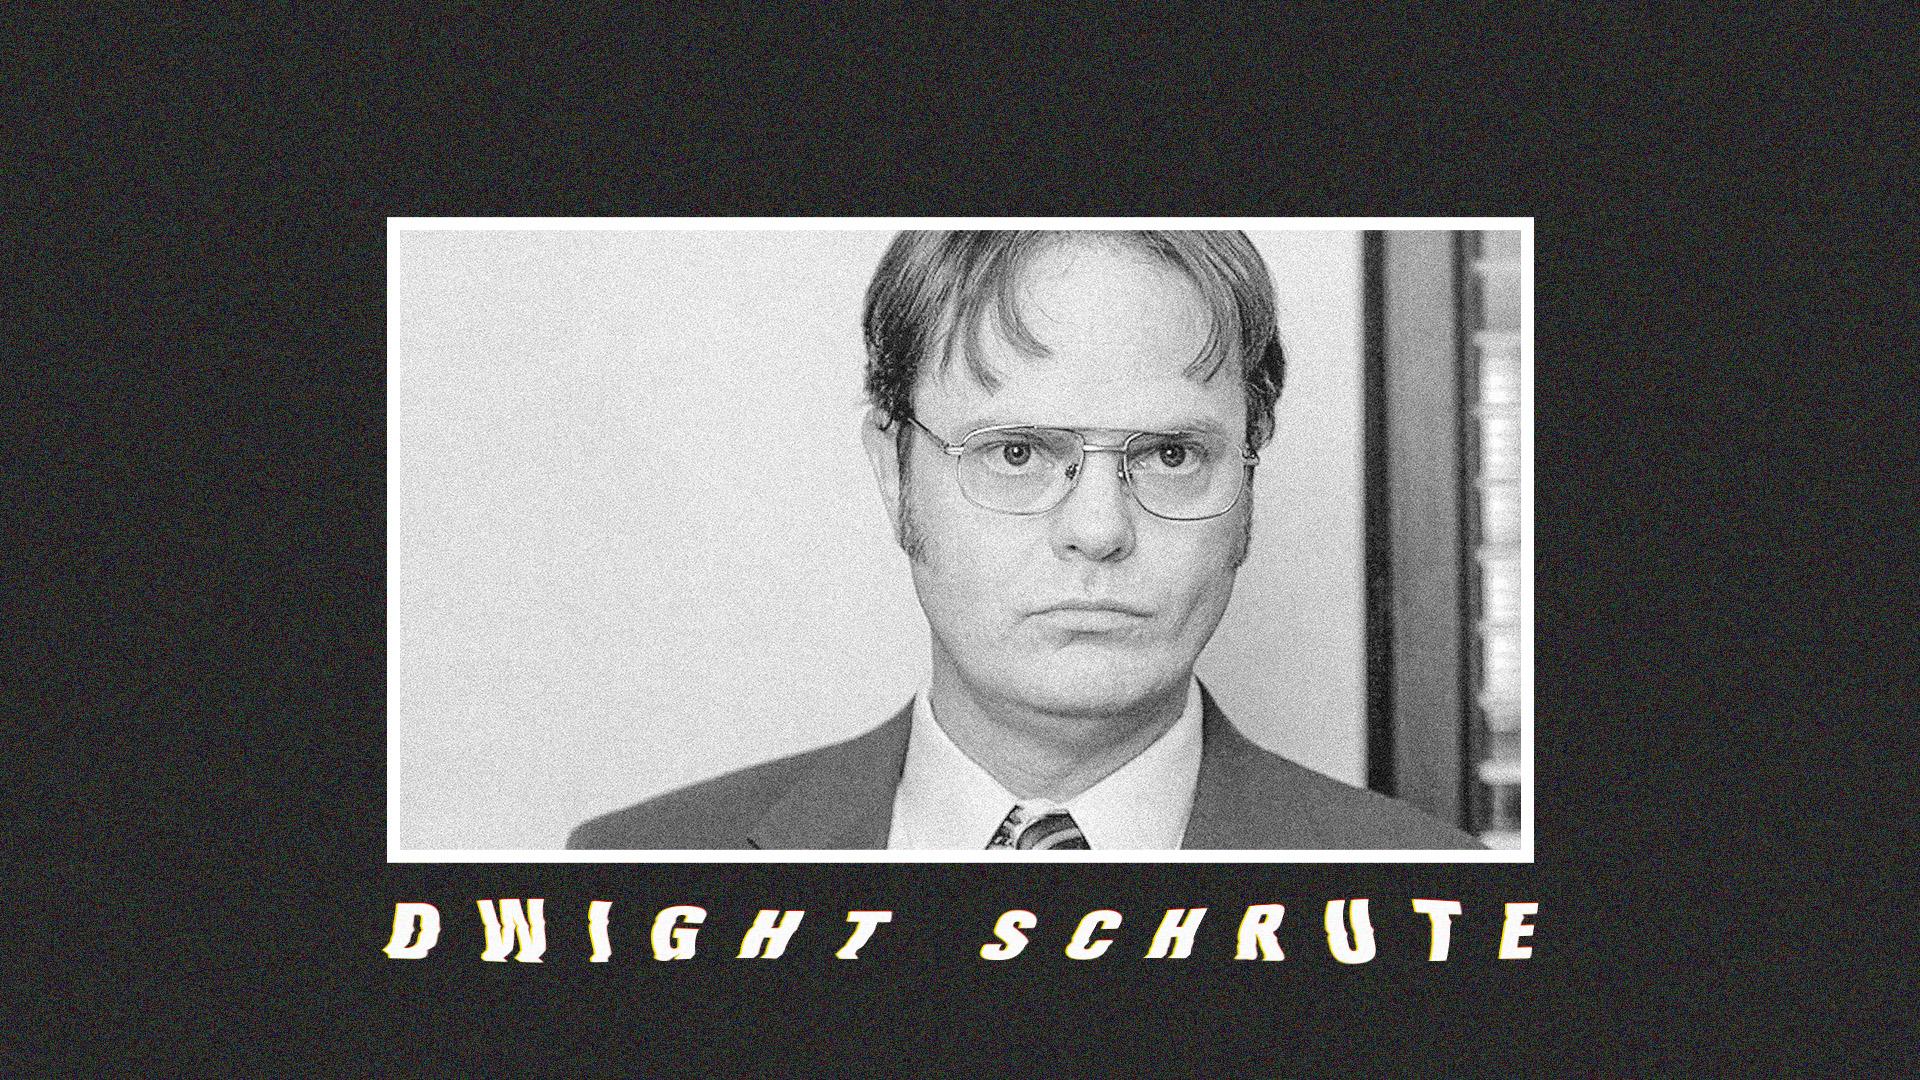 In case you guys want a dwight schrute wallpaper